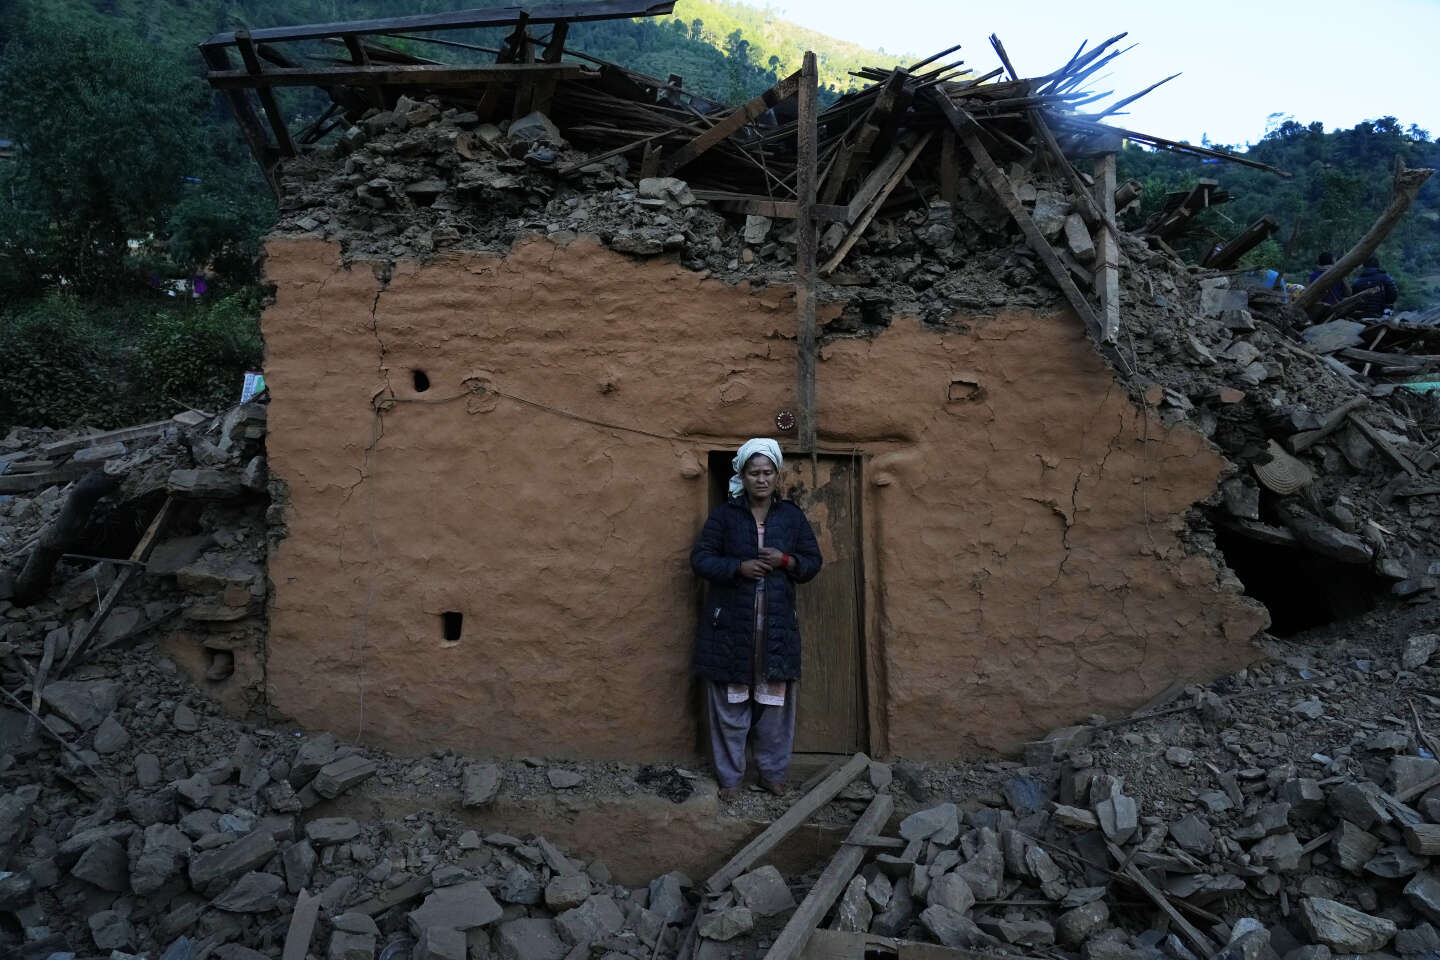 Earthquake-prone Nepal is hit by another earthquake